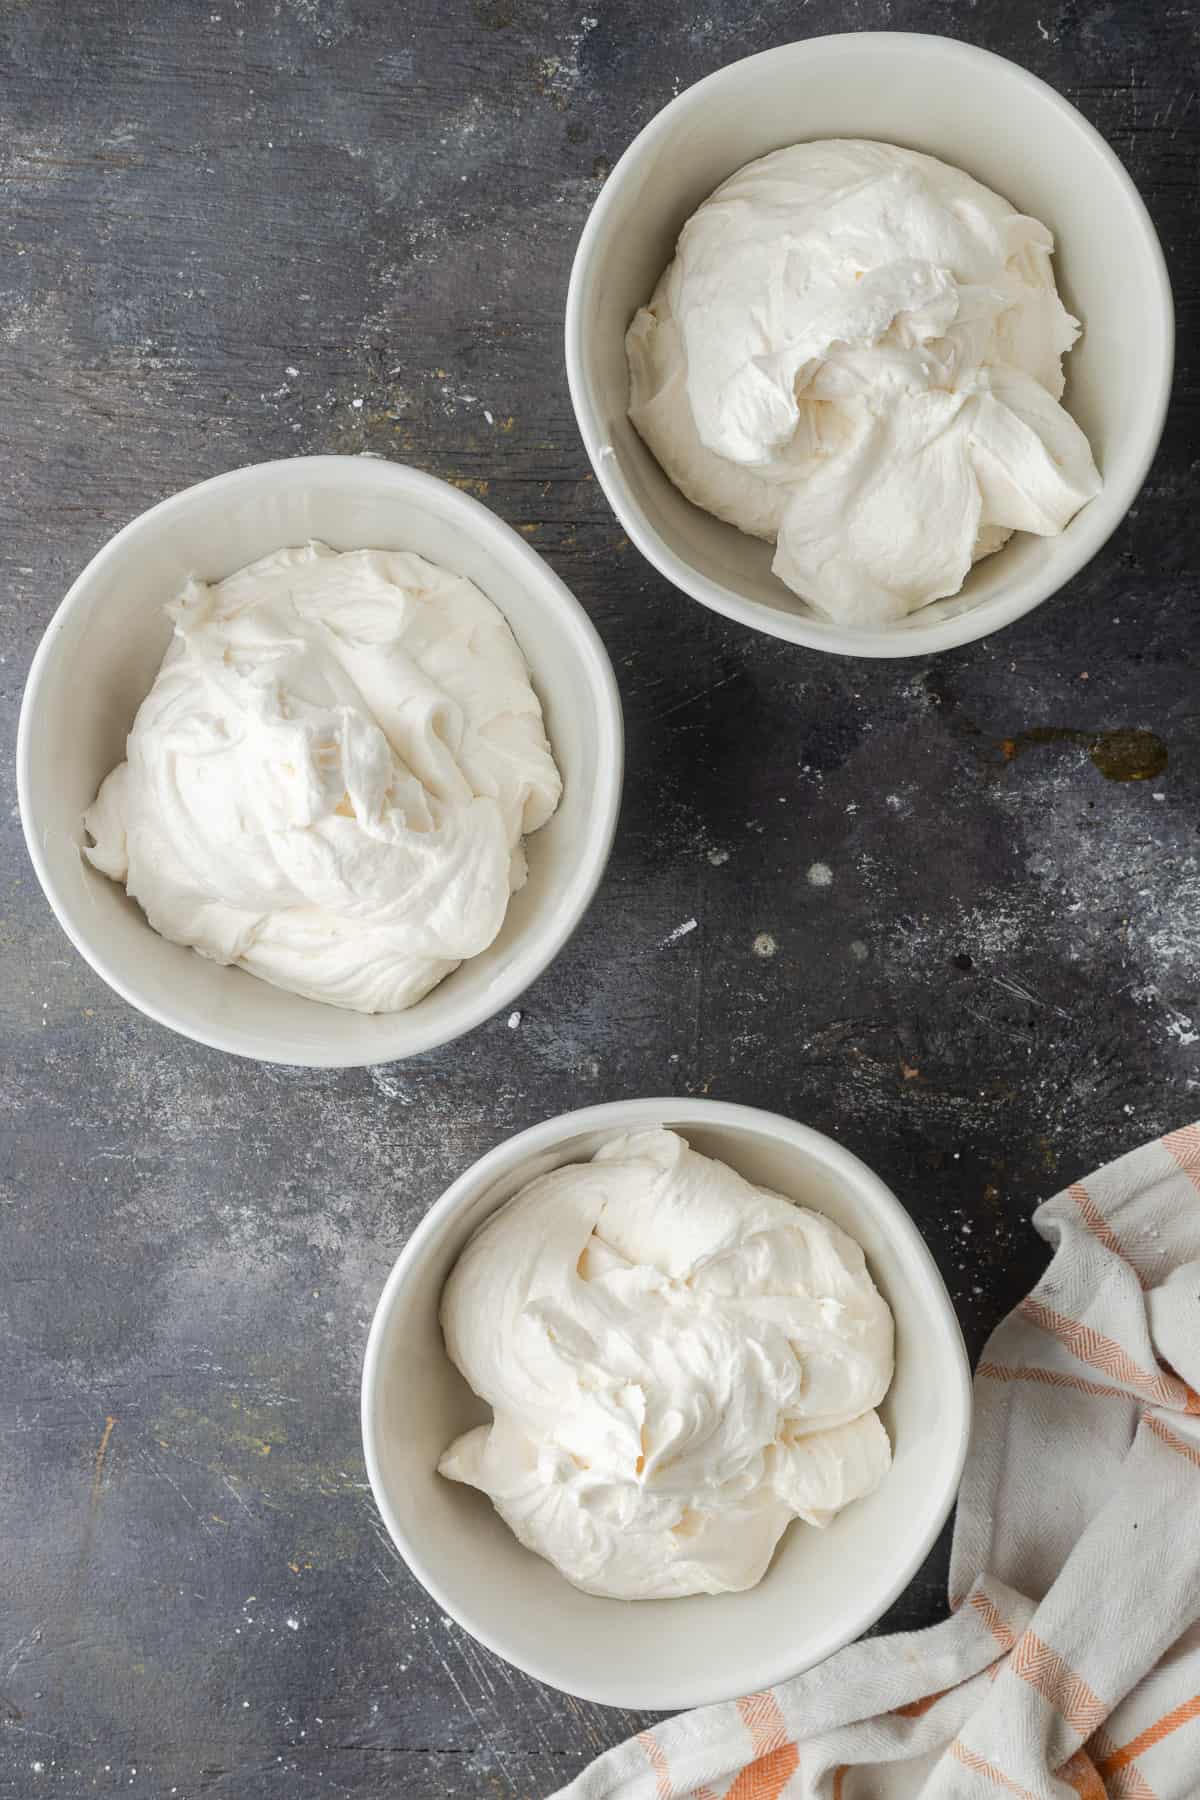 Three bowls of white frosting.